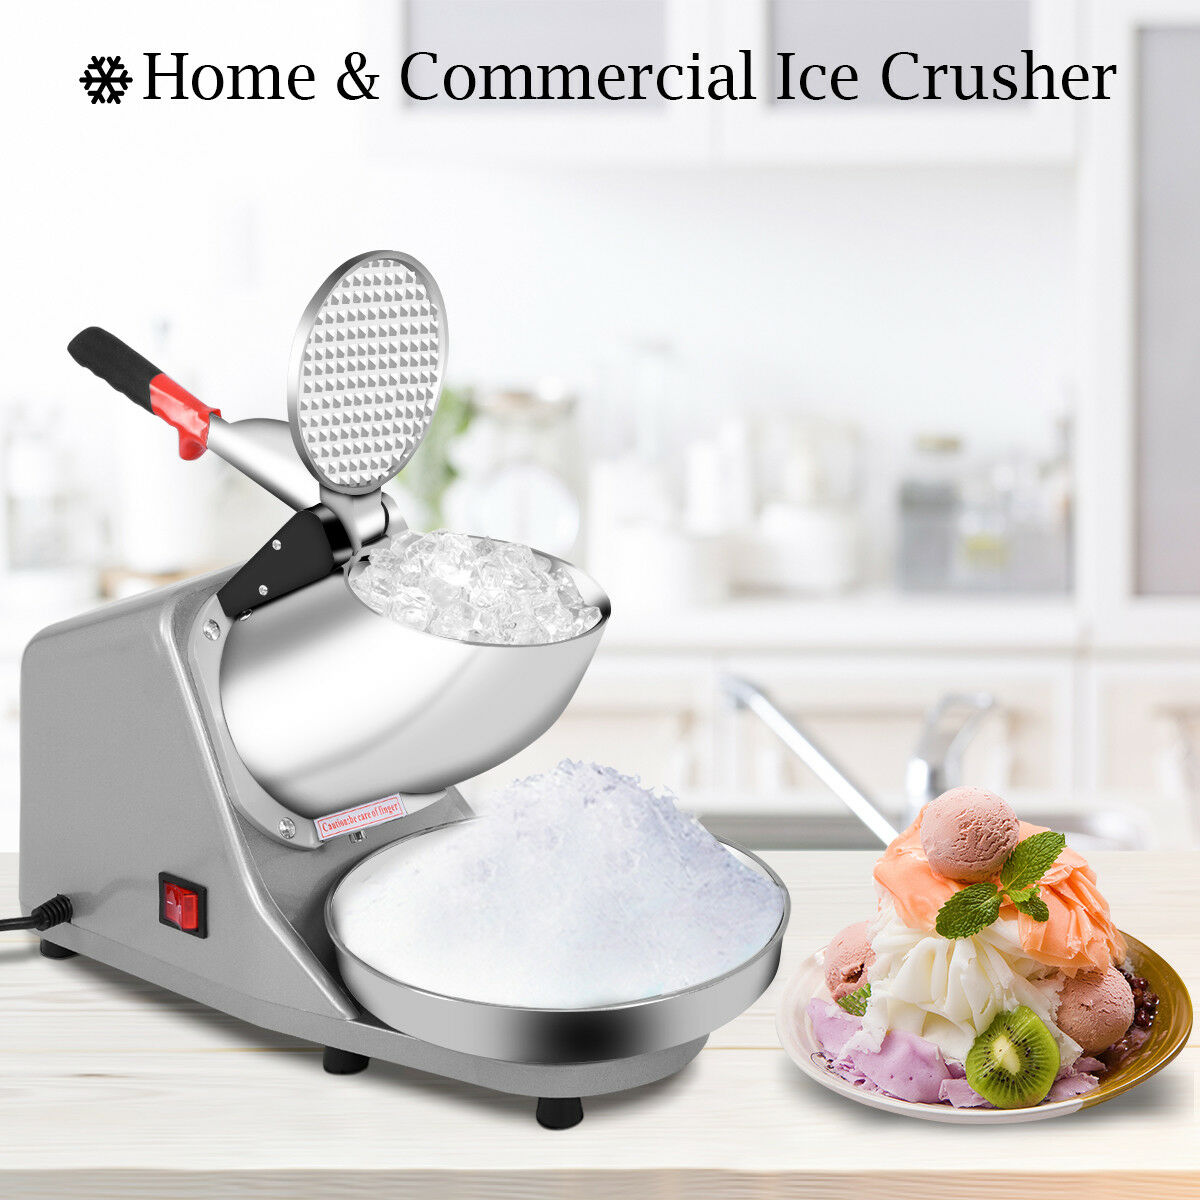 Hefacy Ice Crushers Shaved Ice Machines Ice Maker Stainless Steel Ice Cube Maker Machine Ice Making Machine Countertop Ice Maker Compact Clear Ice Cubes for Kitchen Home Bars peng Red 